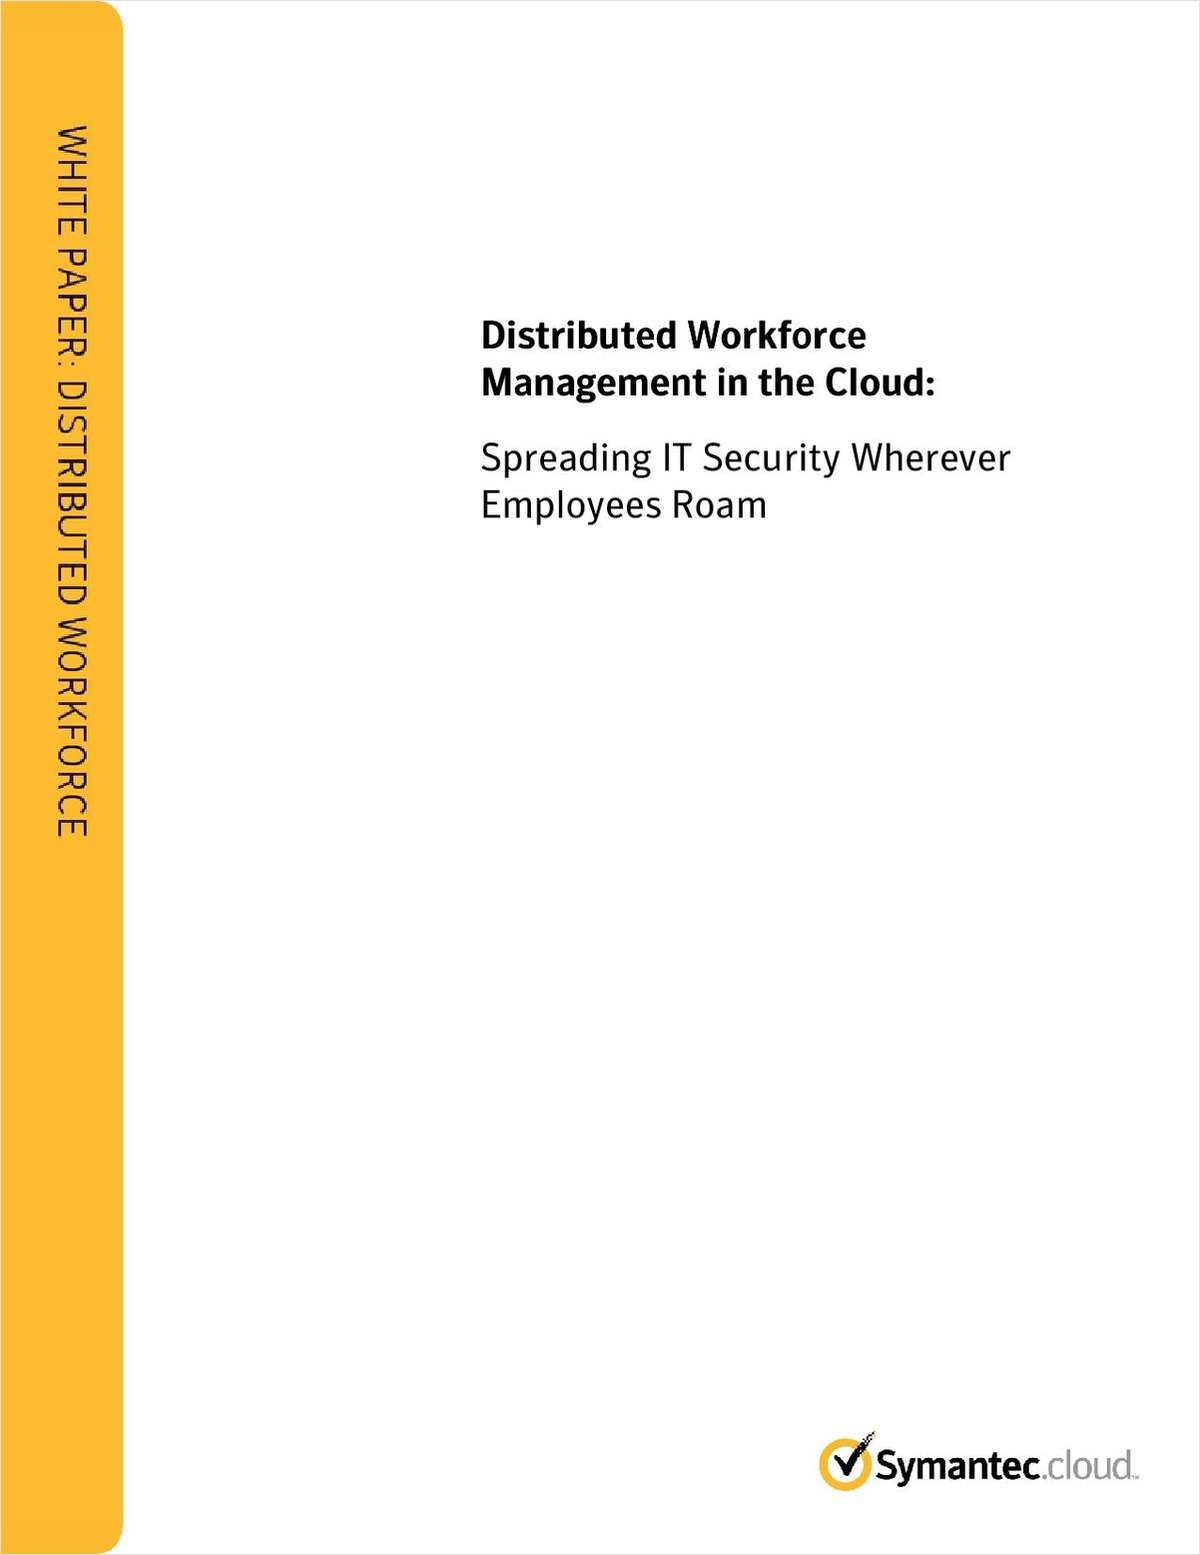 Distributed Workforce Management in the Cloud: Spreading IT Security Wherever Employees Roam